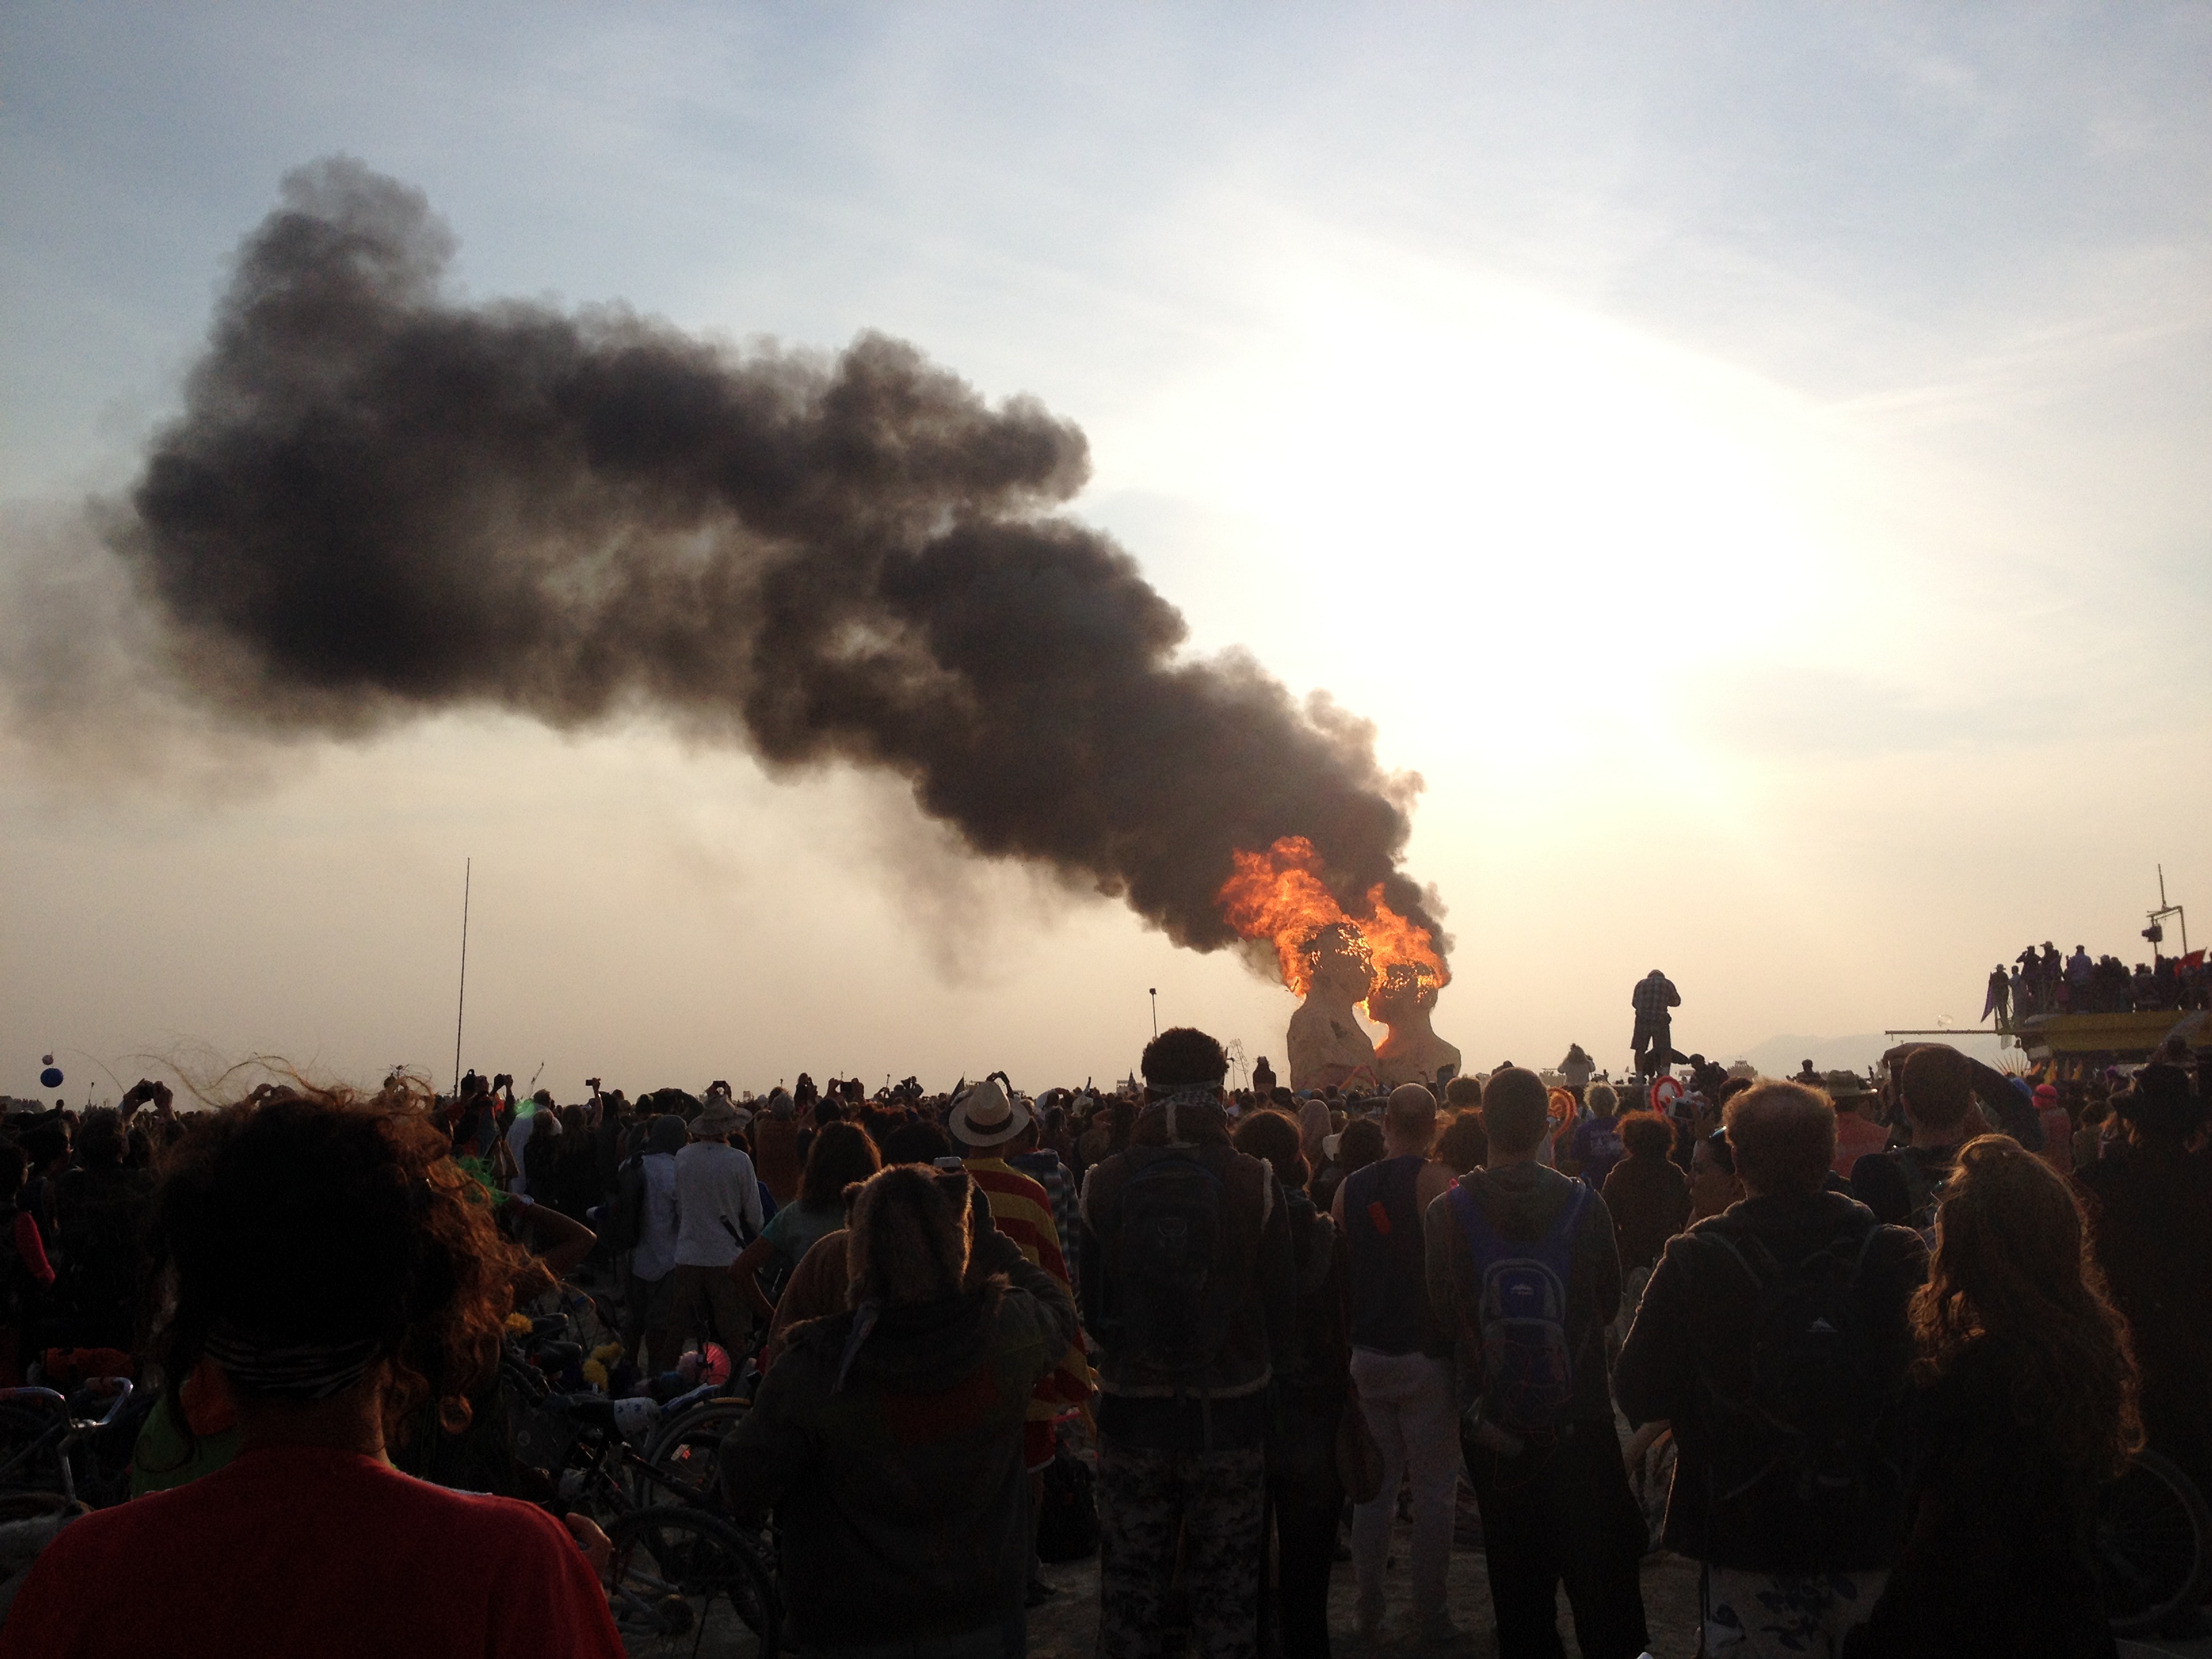 A fire at the Burning Man festival